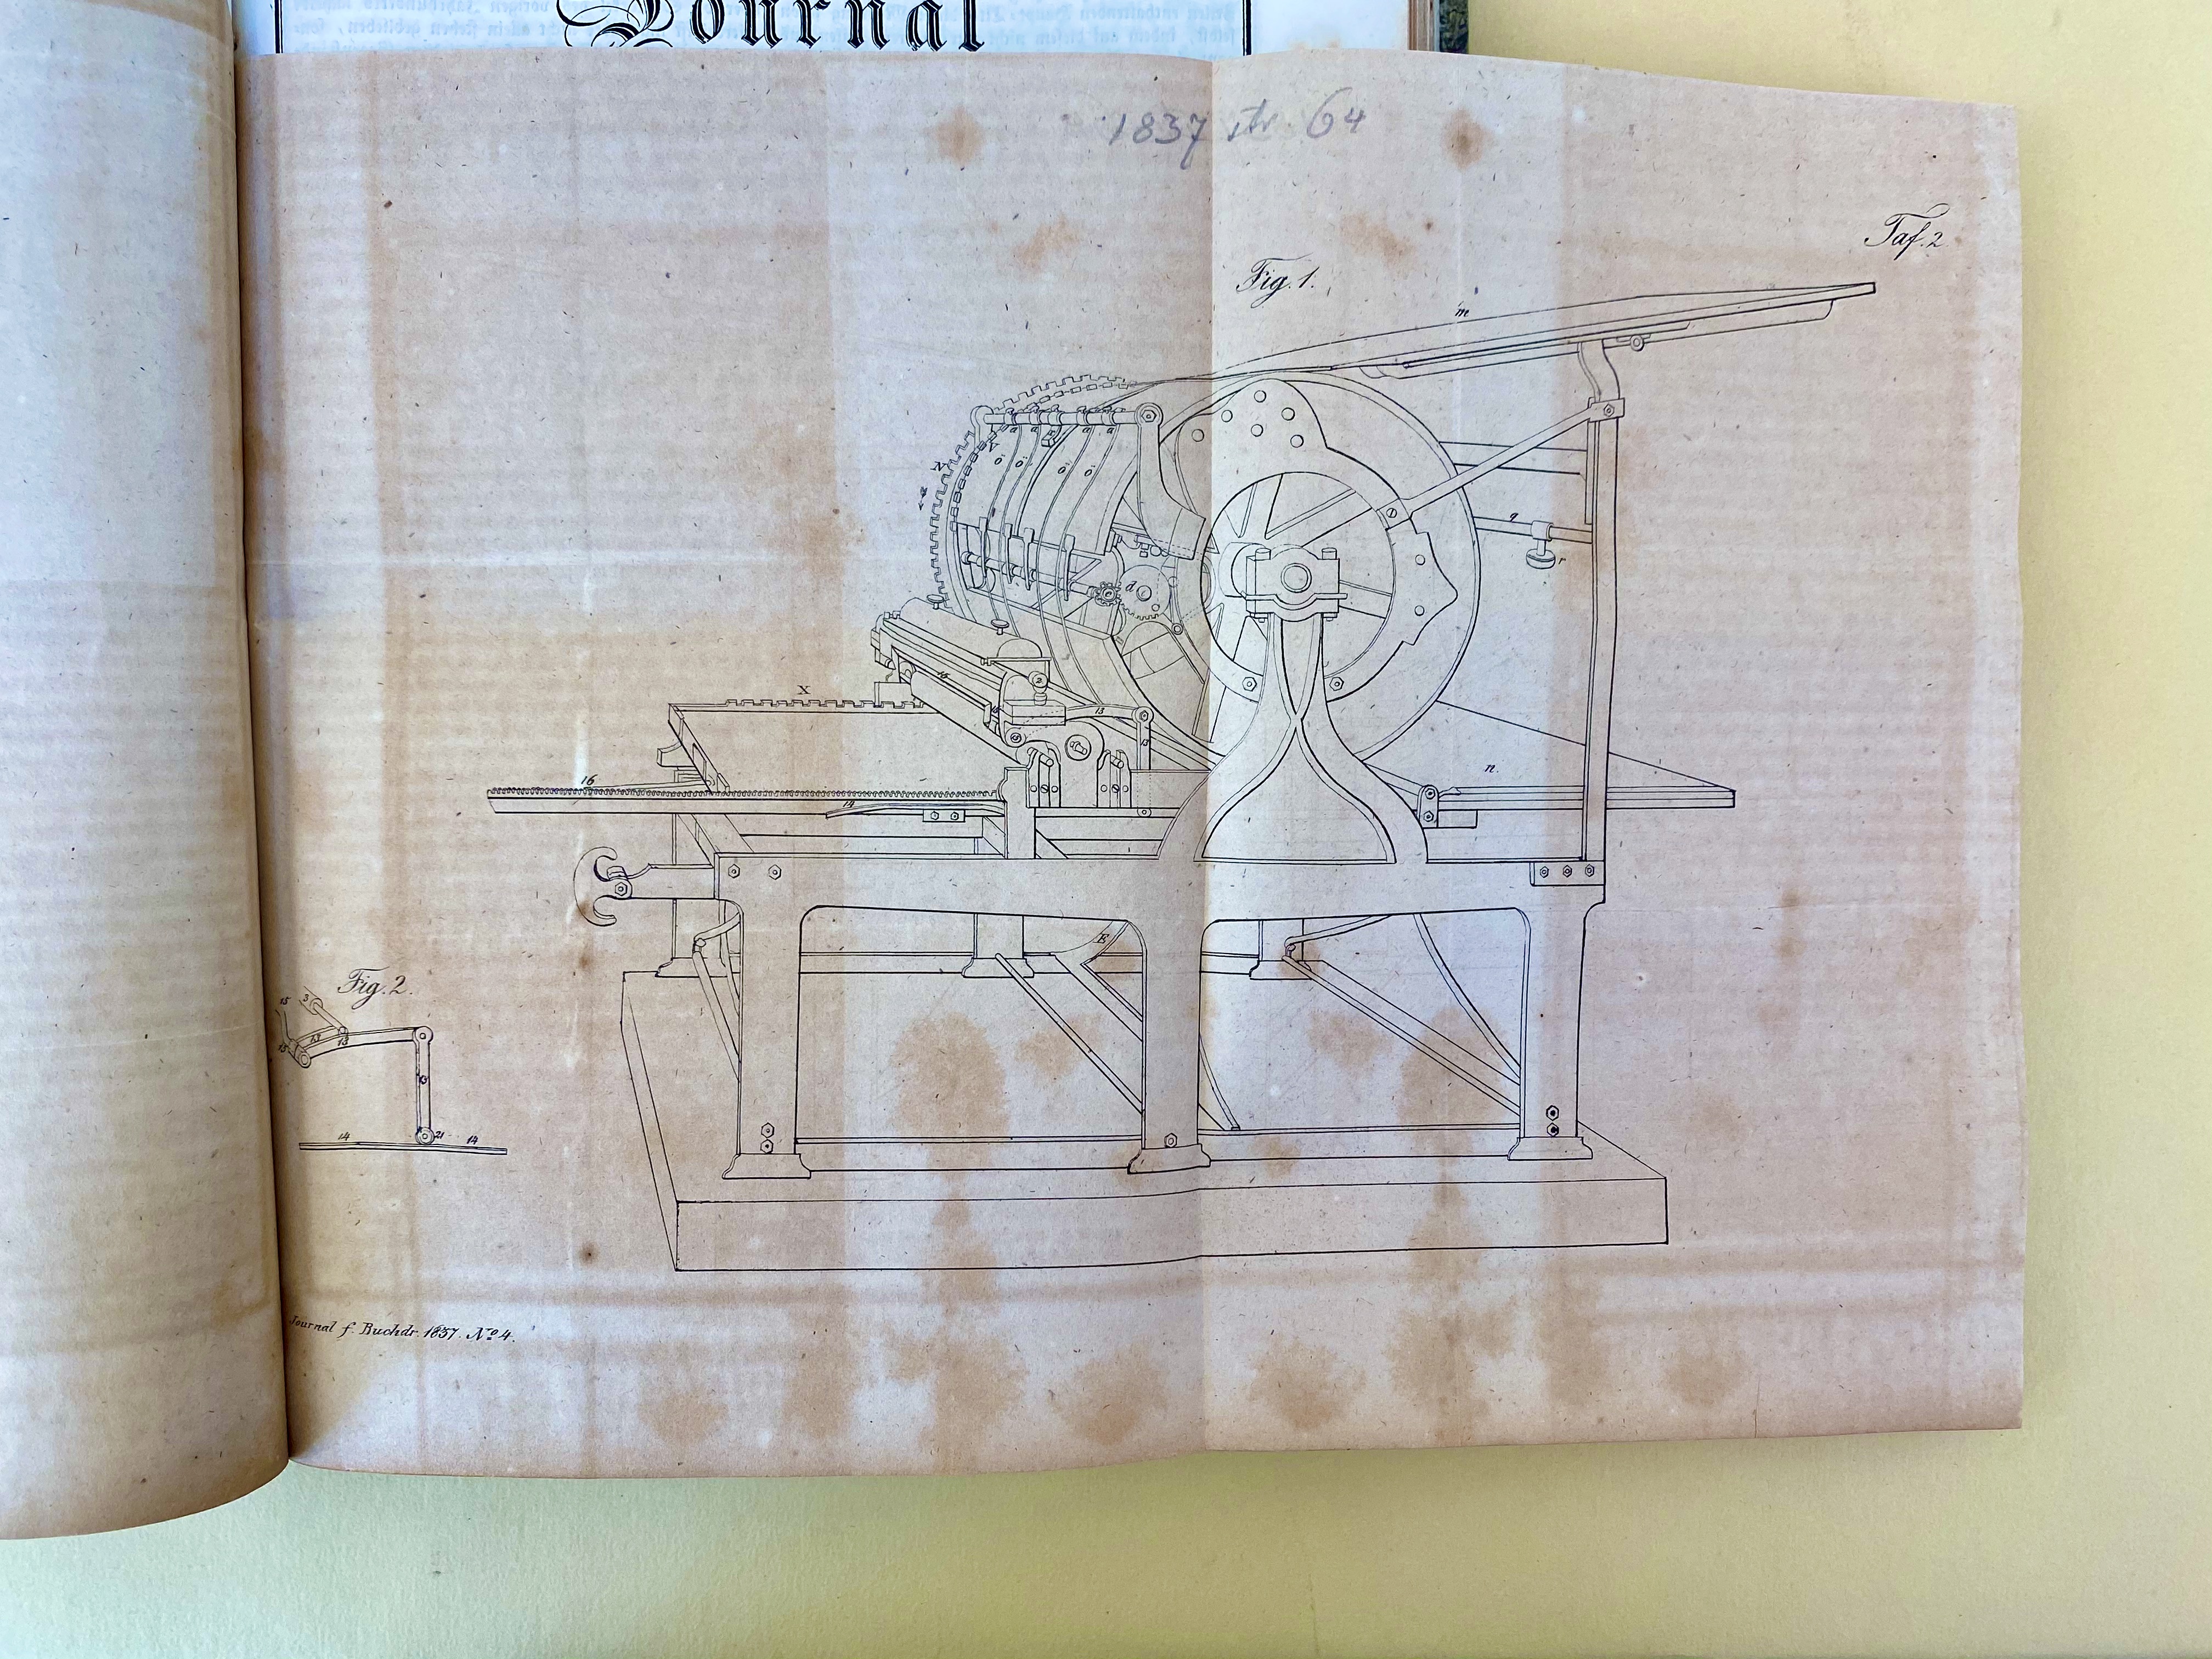 Napier's rotary press from Meyer